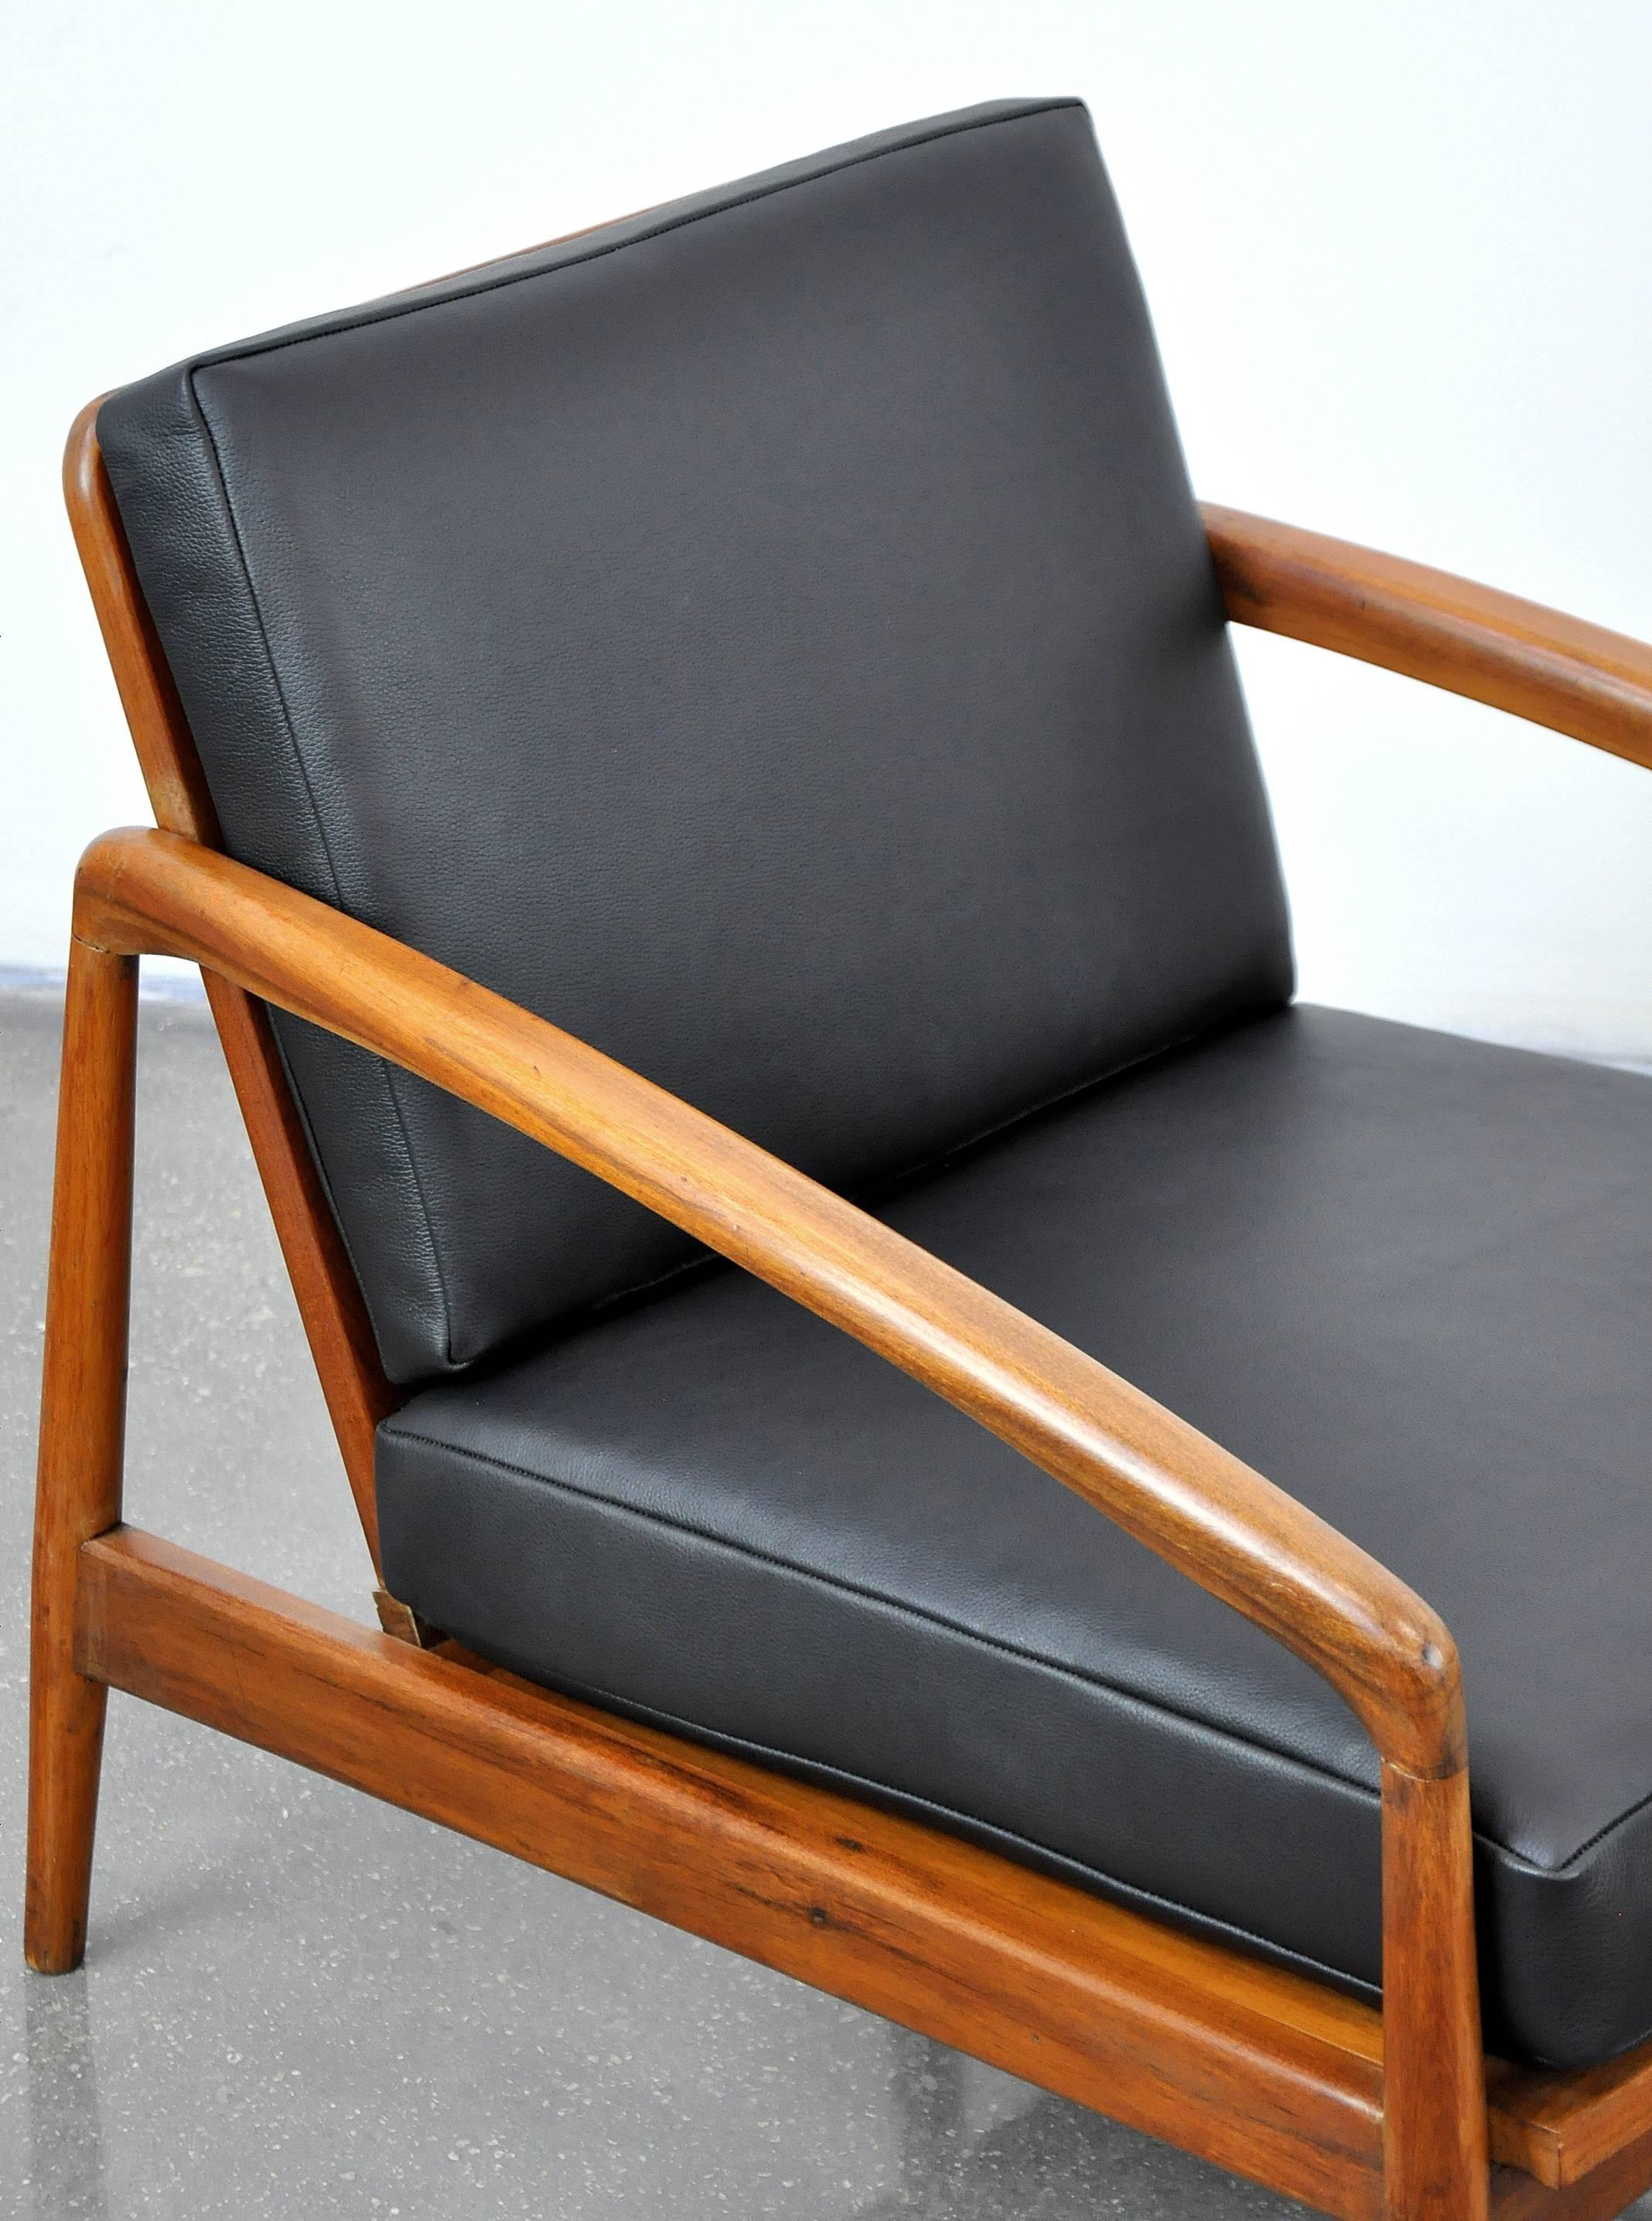 Mid-20th Century Pair of Danish Modern Black Leather and Teak Lounge Chairs